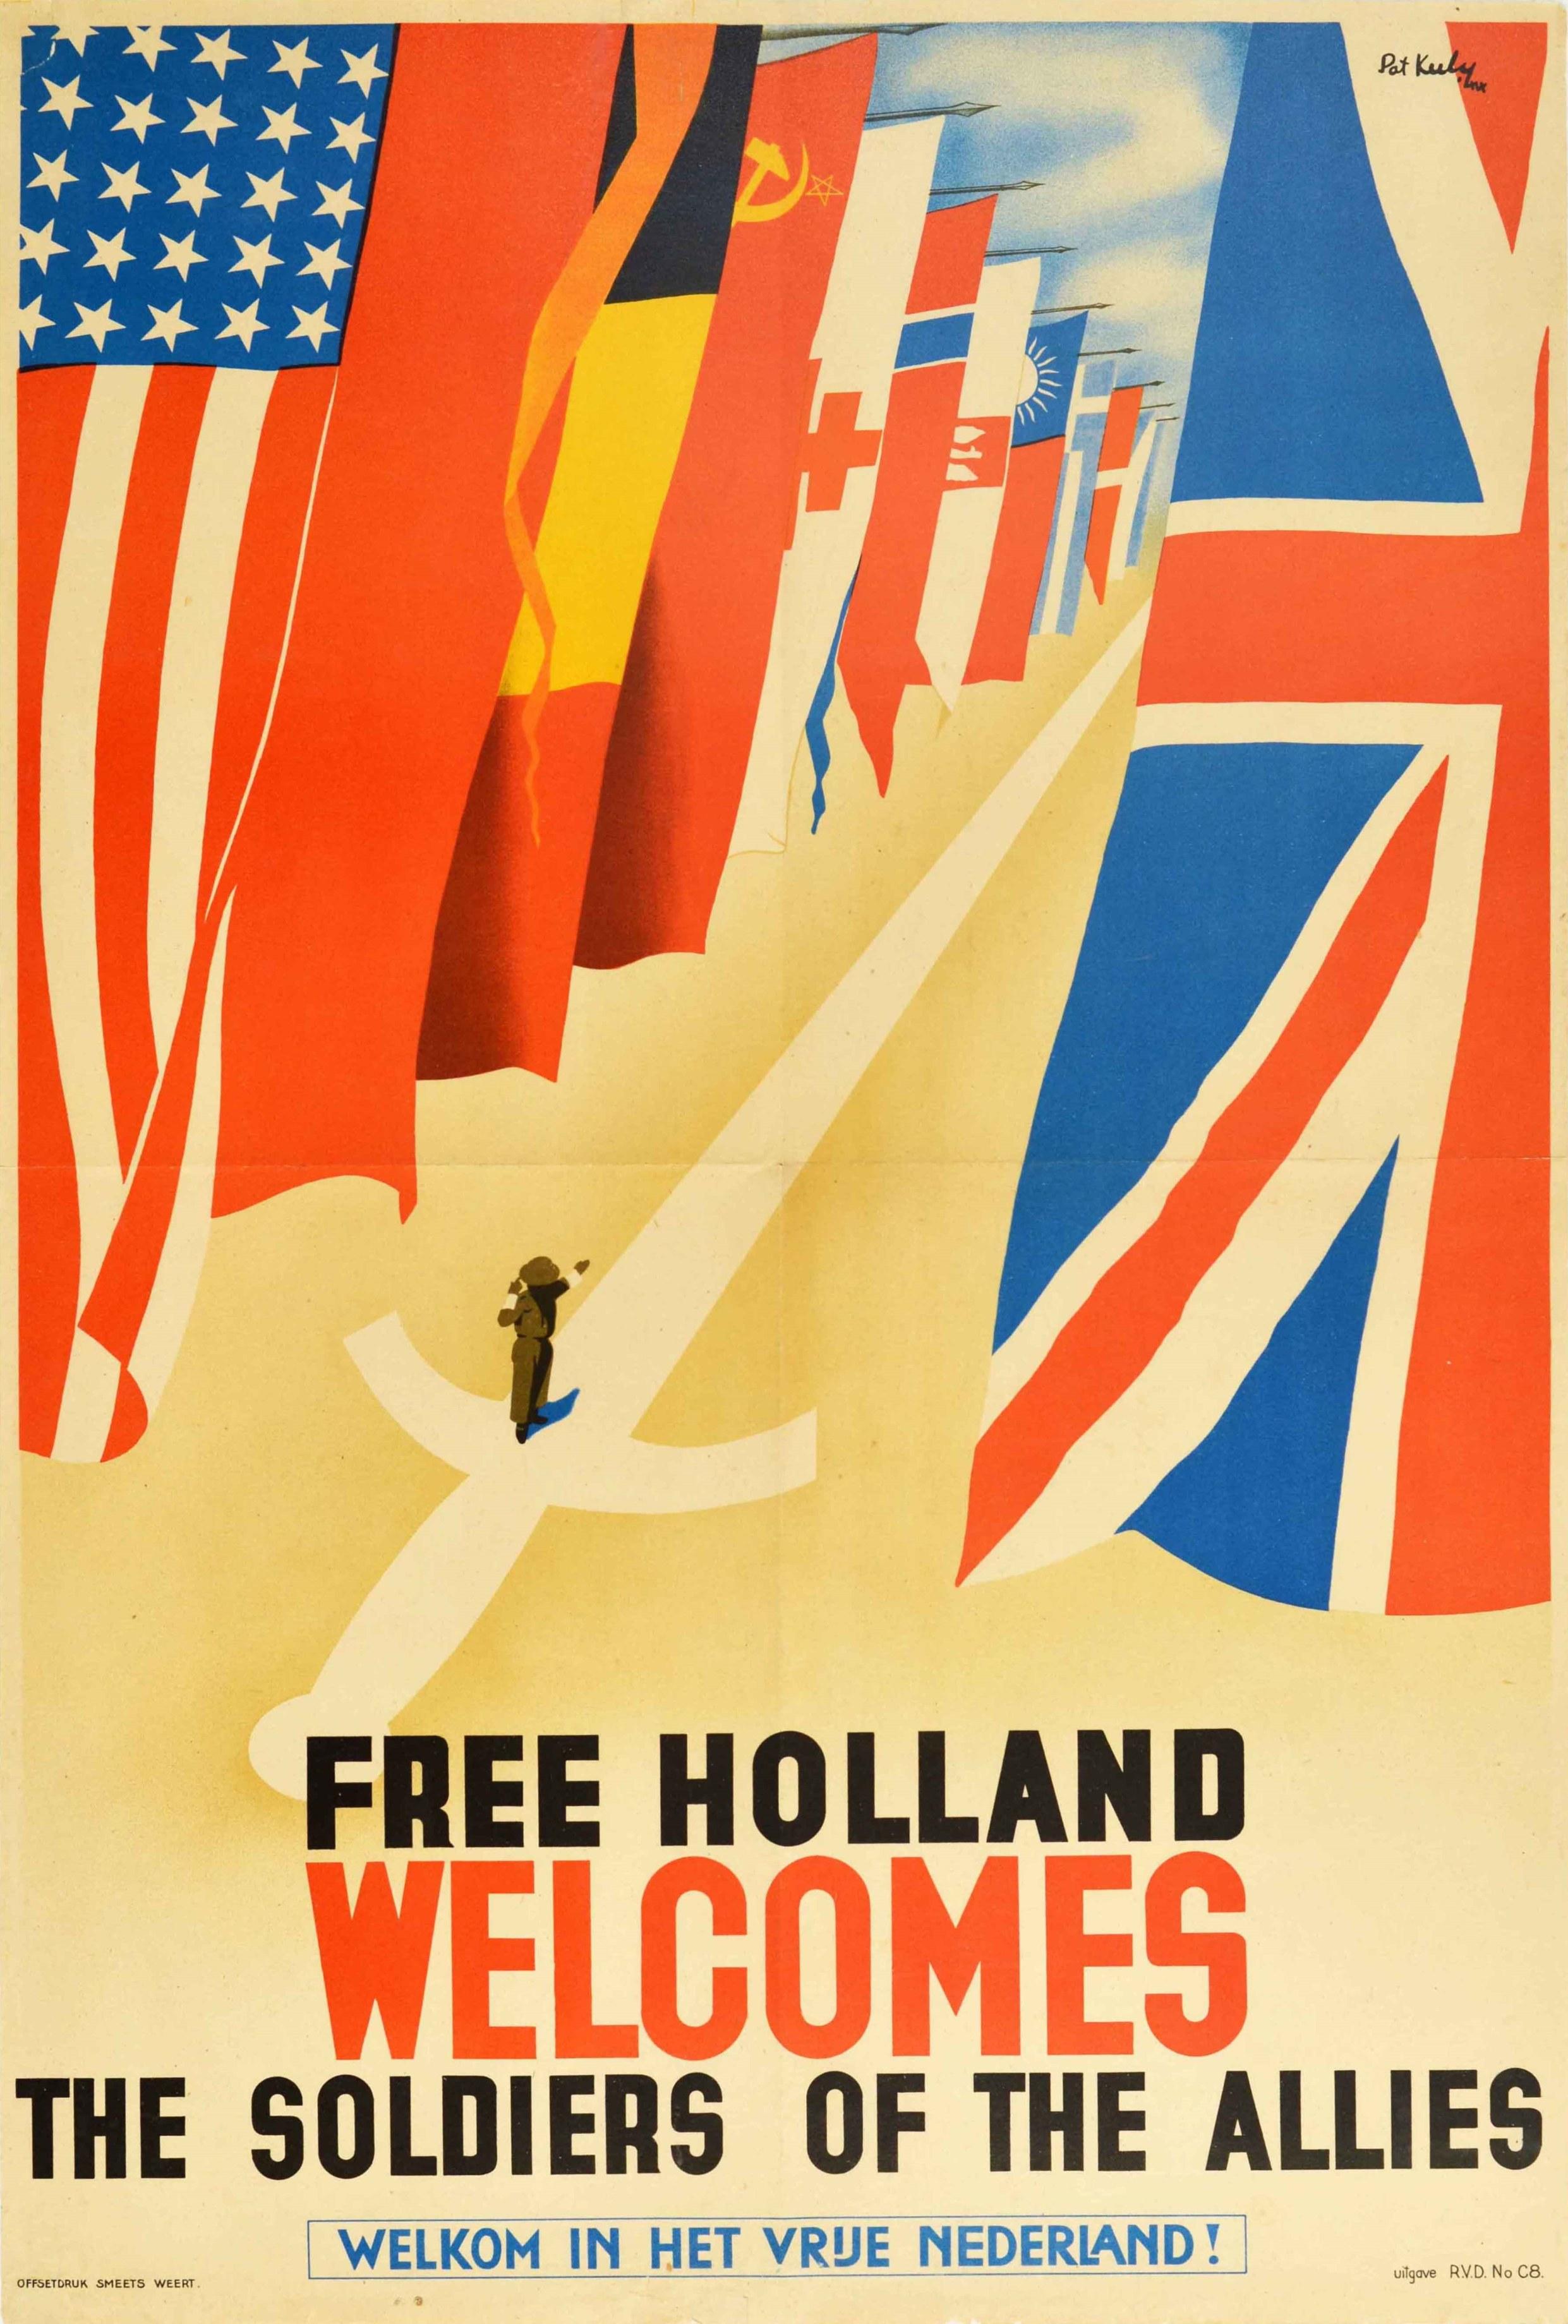 Pat Keely Print - Original Vintage Poster Free Holland Welcomes The Soldiers Of The Allies WWII 